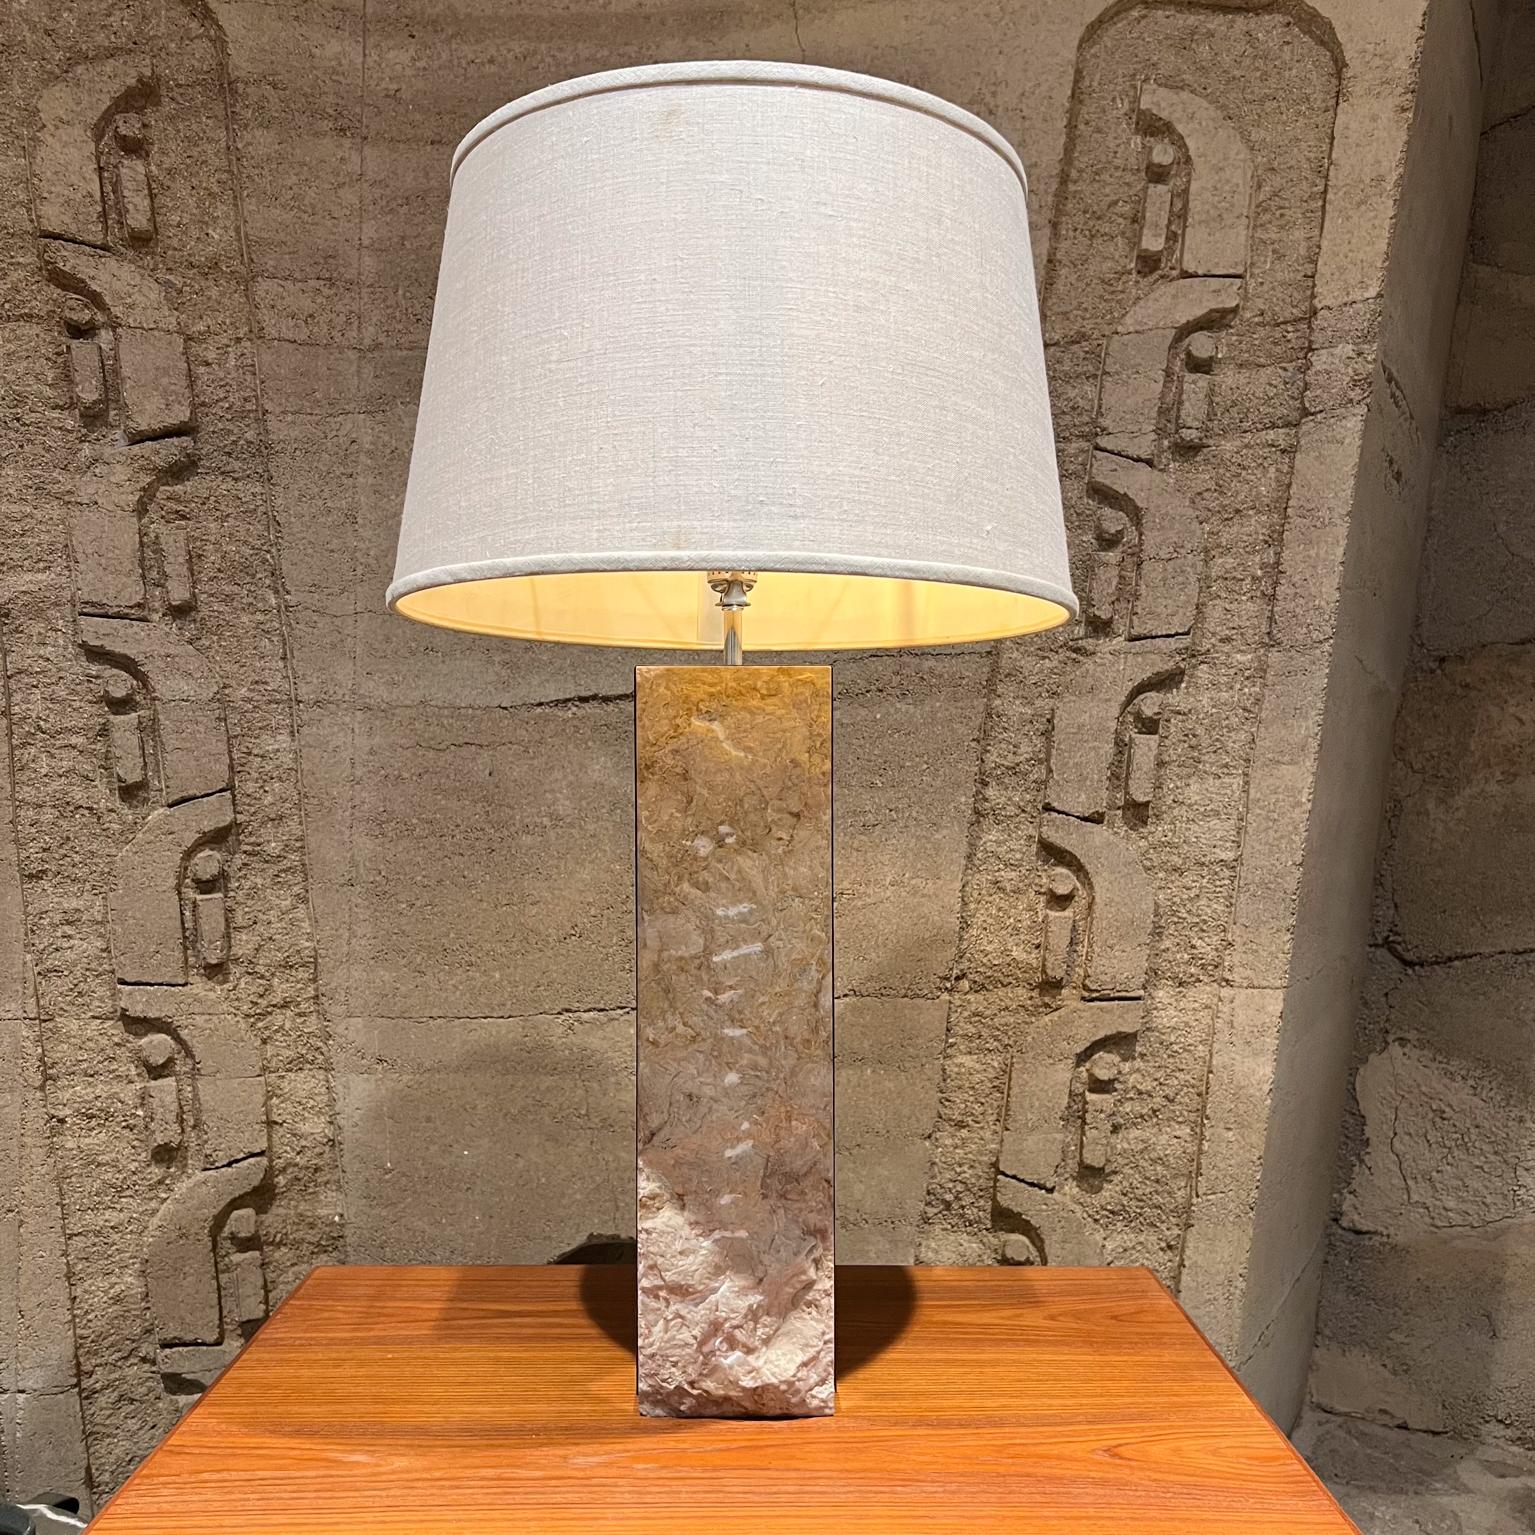 
1970s Italian Table Lamp Raw Edge Travertine and Stainless Steel
Rough Cut Modern Table Lamp Italy
Late 20th Century
Unmarked
24 h to socket x 5.13 d x 7 w
Preowned unrestored vintage condition
No shade is included.
Refer to images provided.